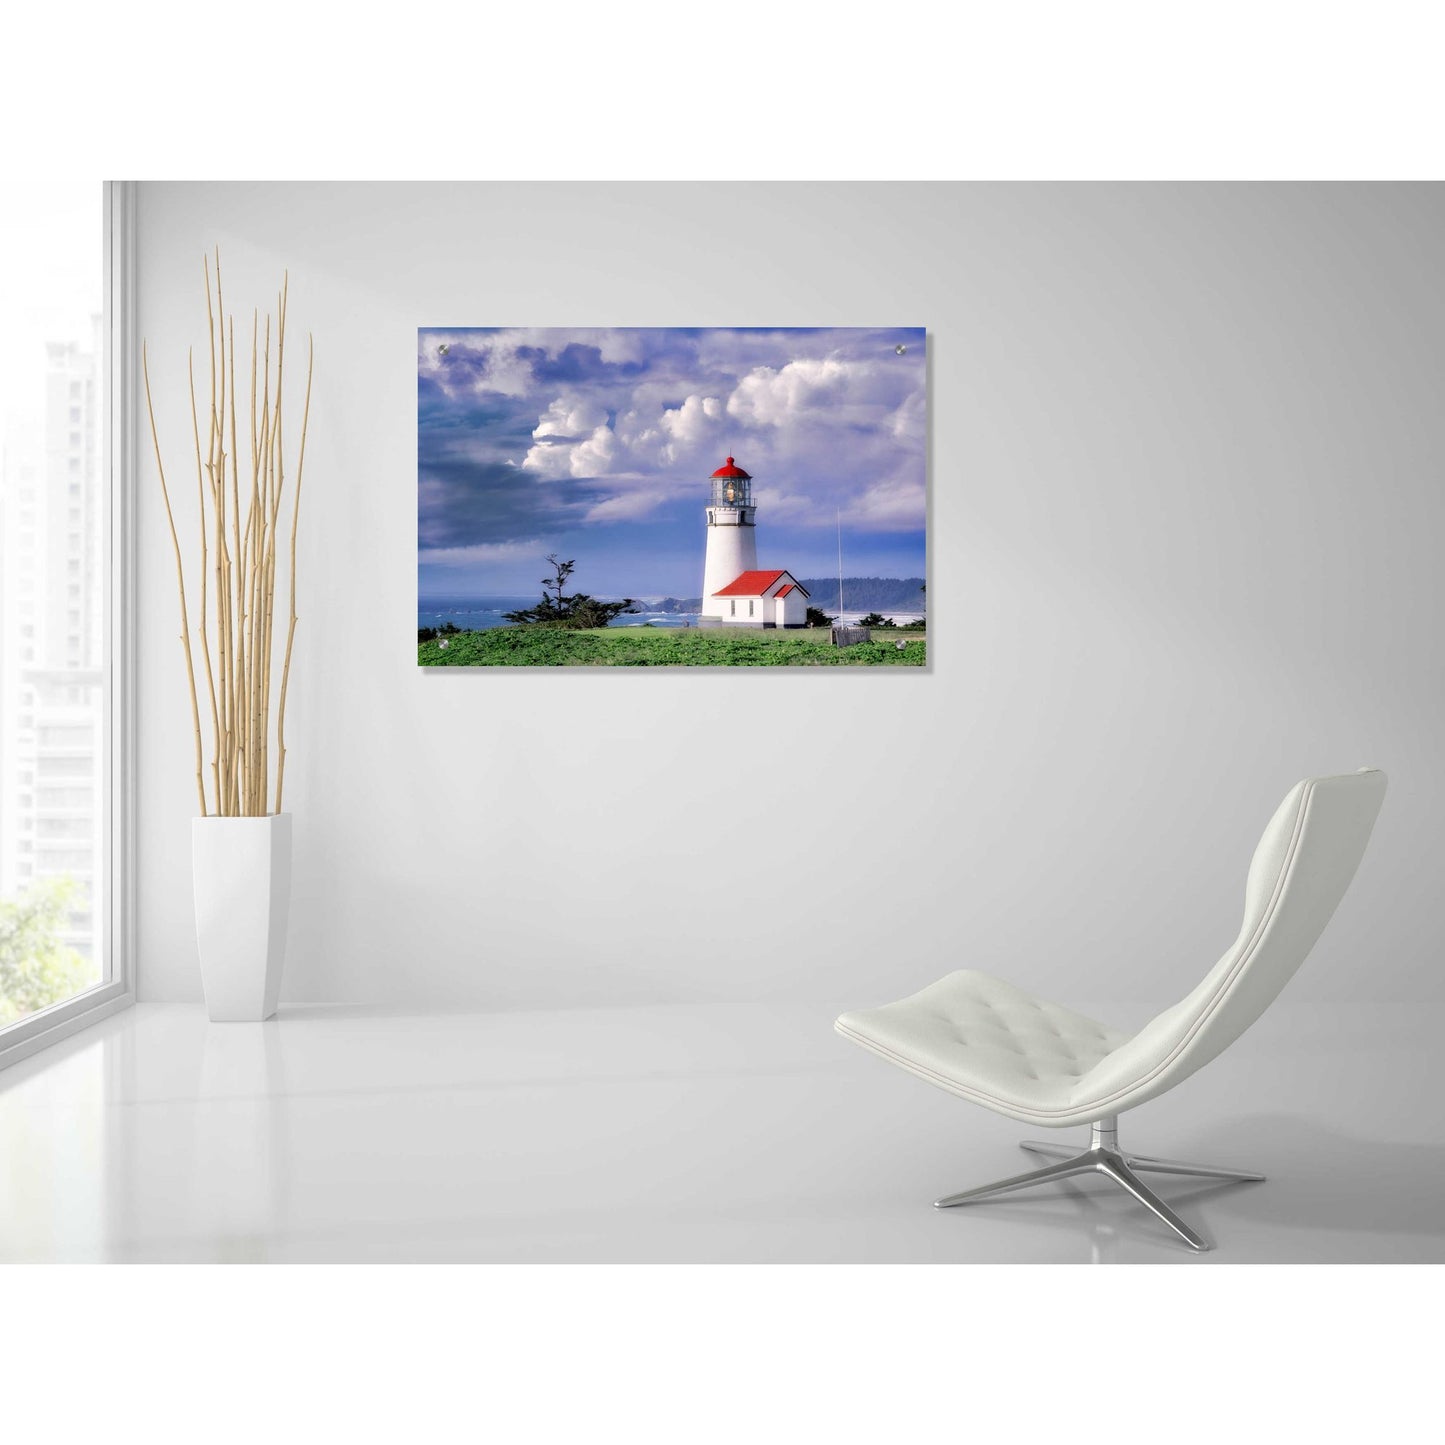 Epic Art 'Red Roof Lighthouse' by Dennis Frates, Acrylic Glass Wall Art,36x24